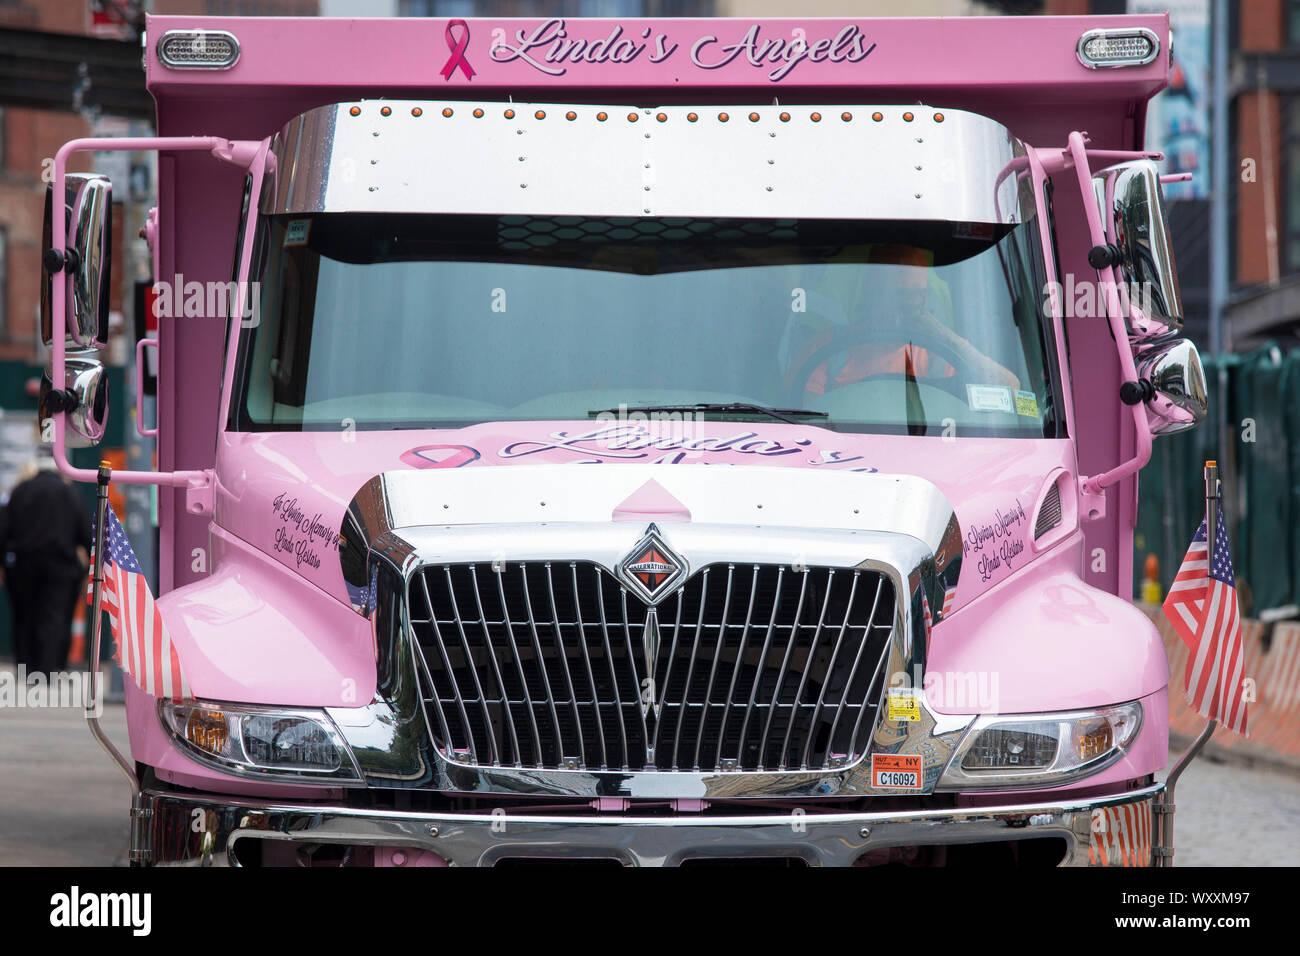 Bright pink truck painted In Loving Memory of Linda - Linda's Angels in New York City, USA Stock Photo